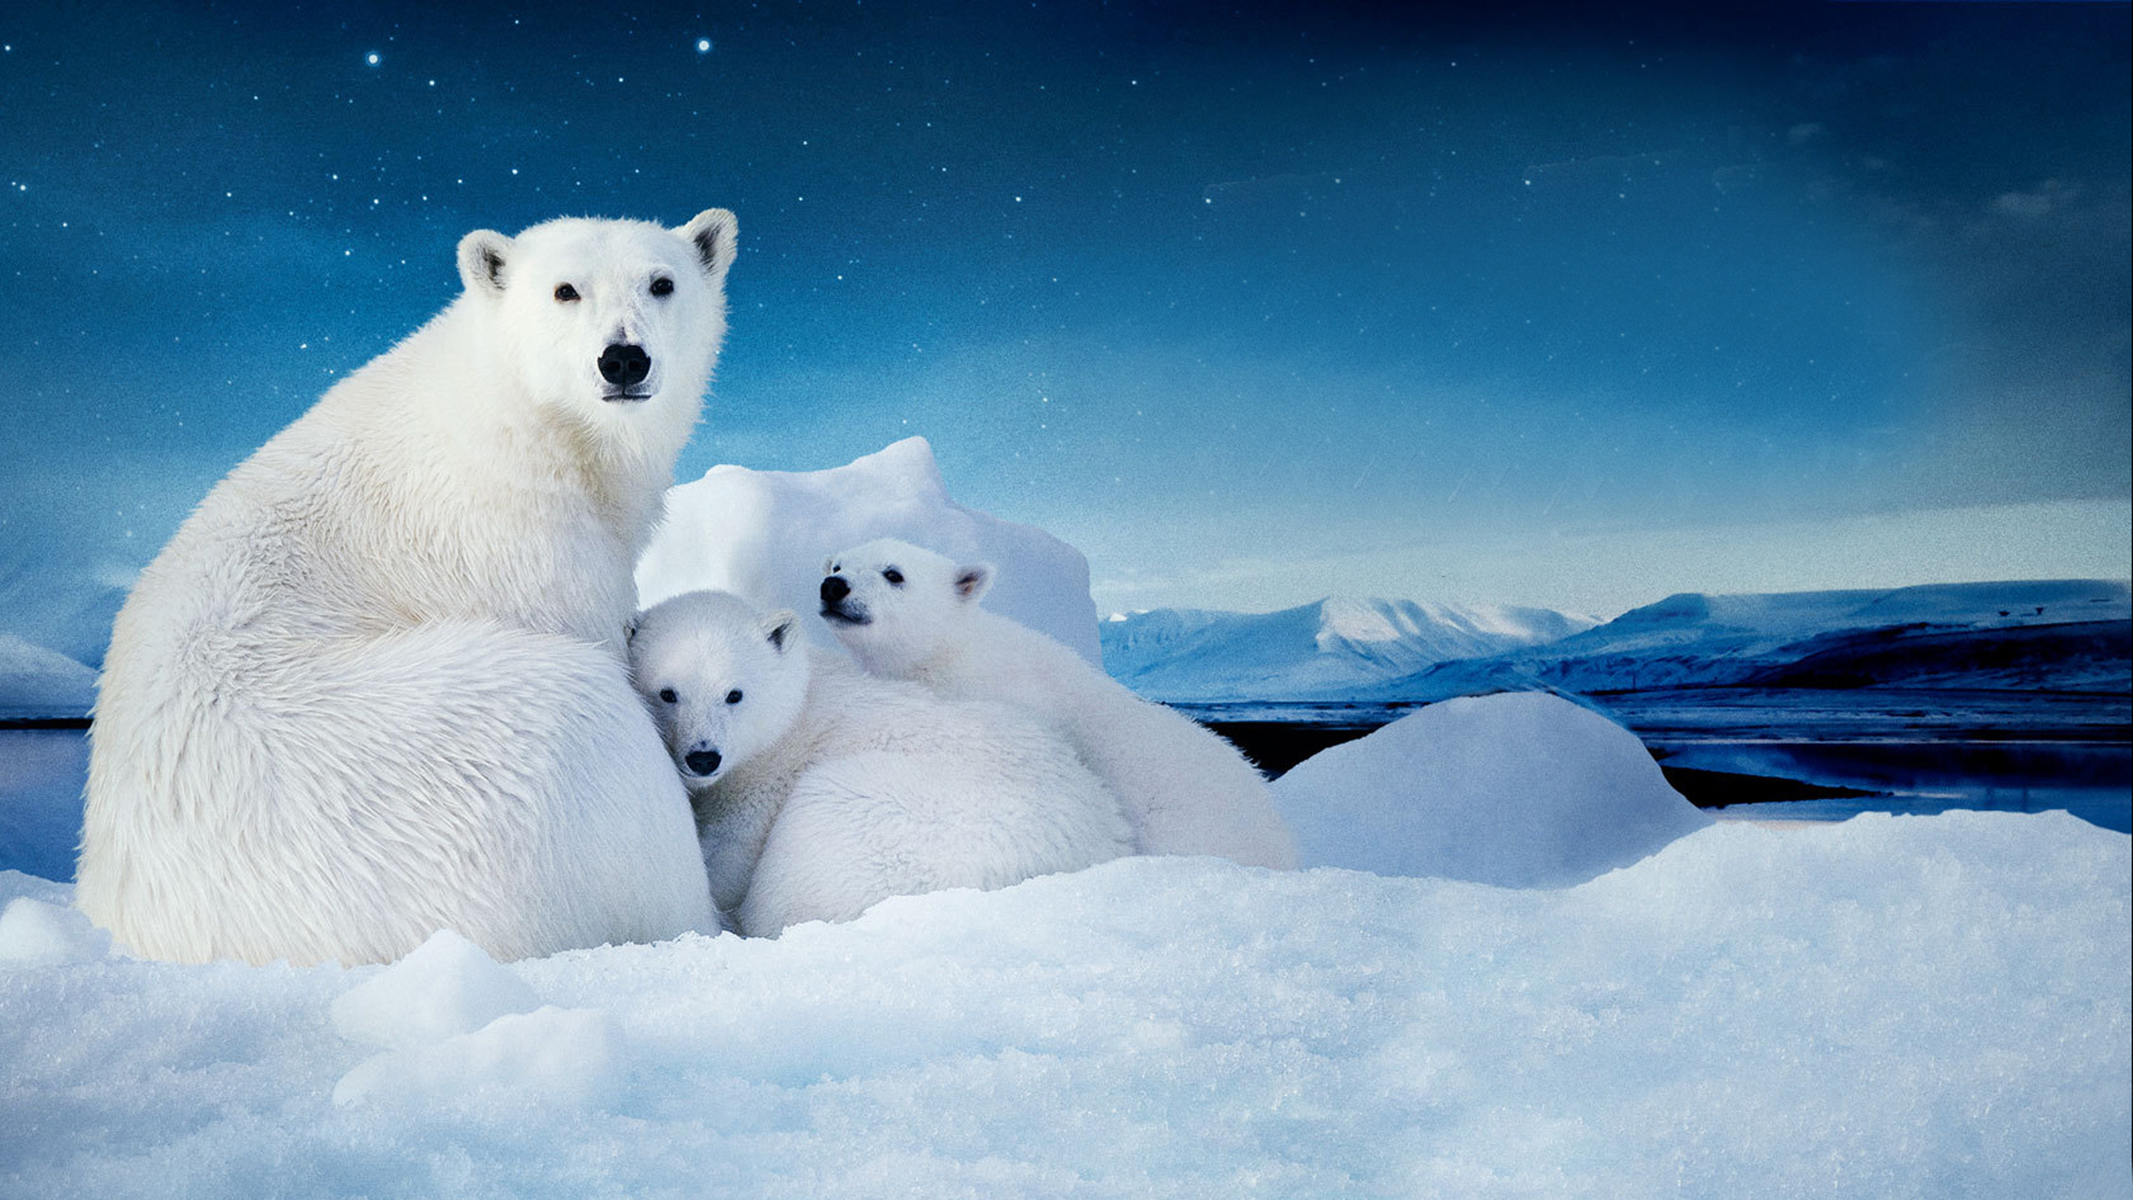 Movie To The Arctic HD Wallpaper | Background Image